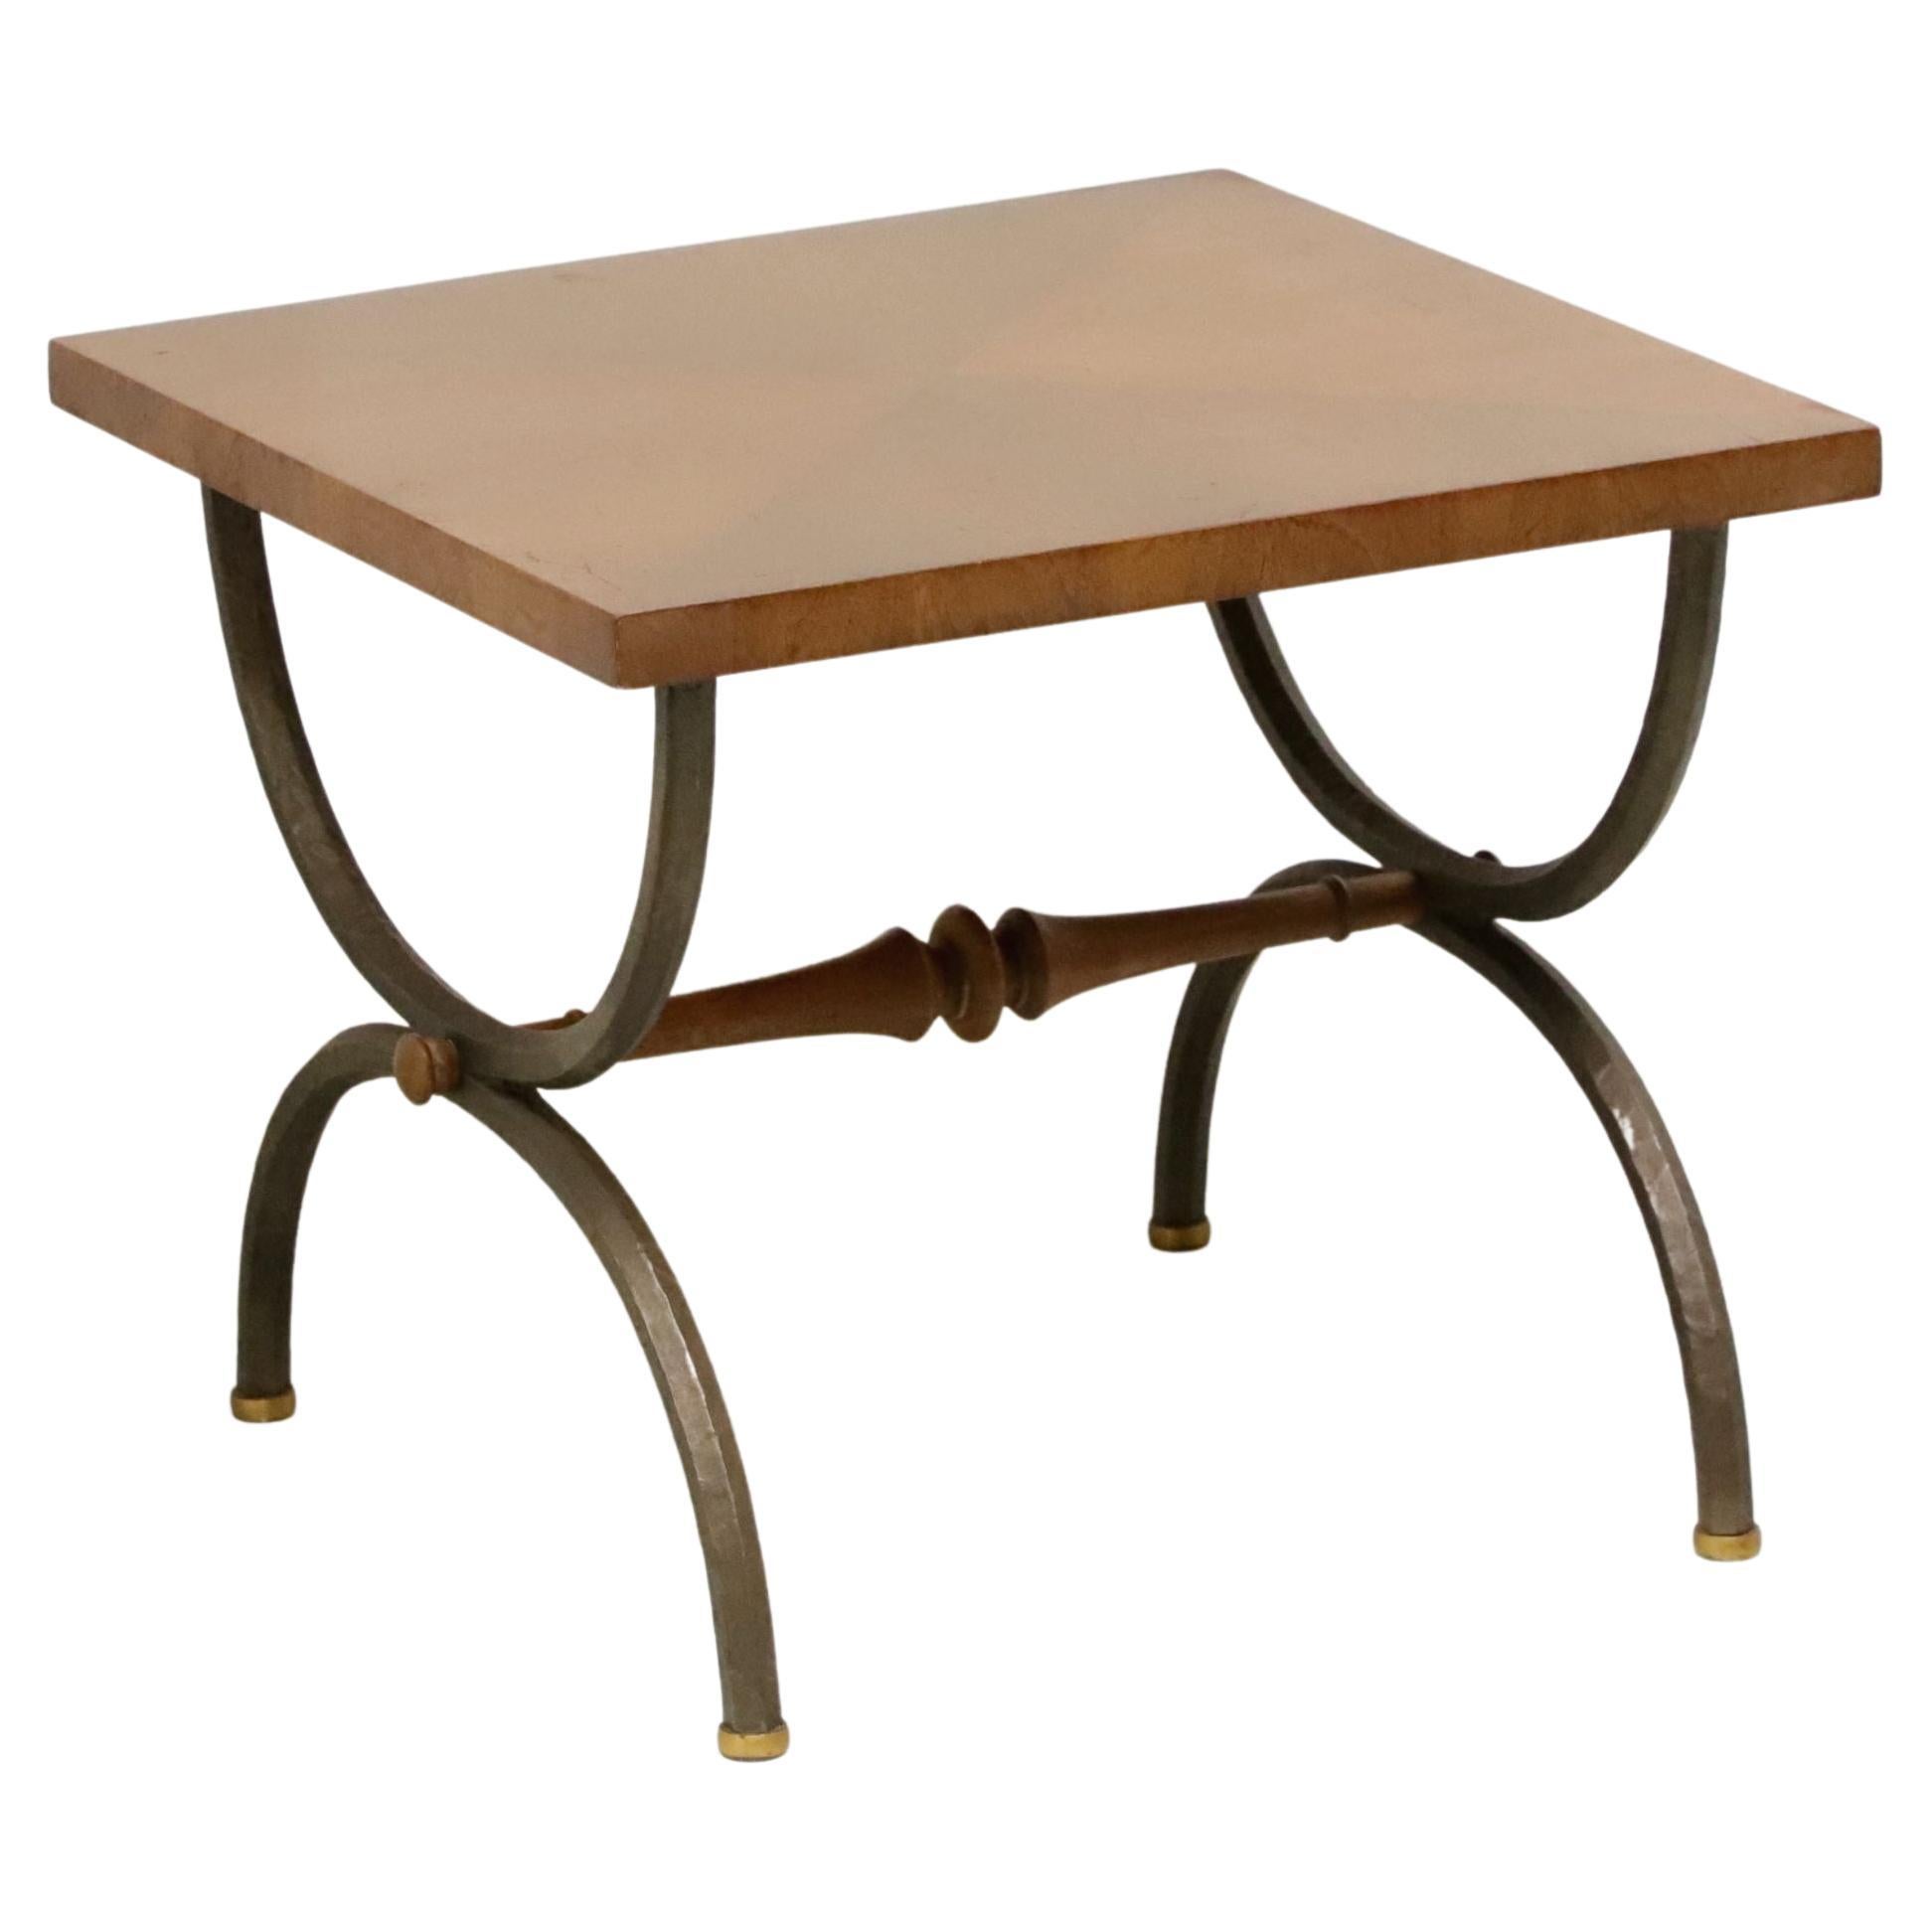 TOMLINSON 1960's Walnut Square Cocktail Table with Metal Legs - C